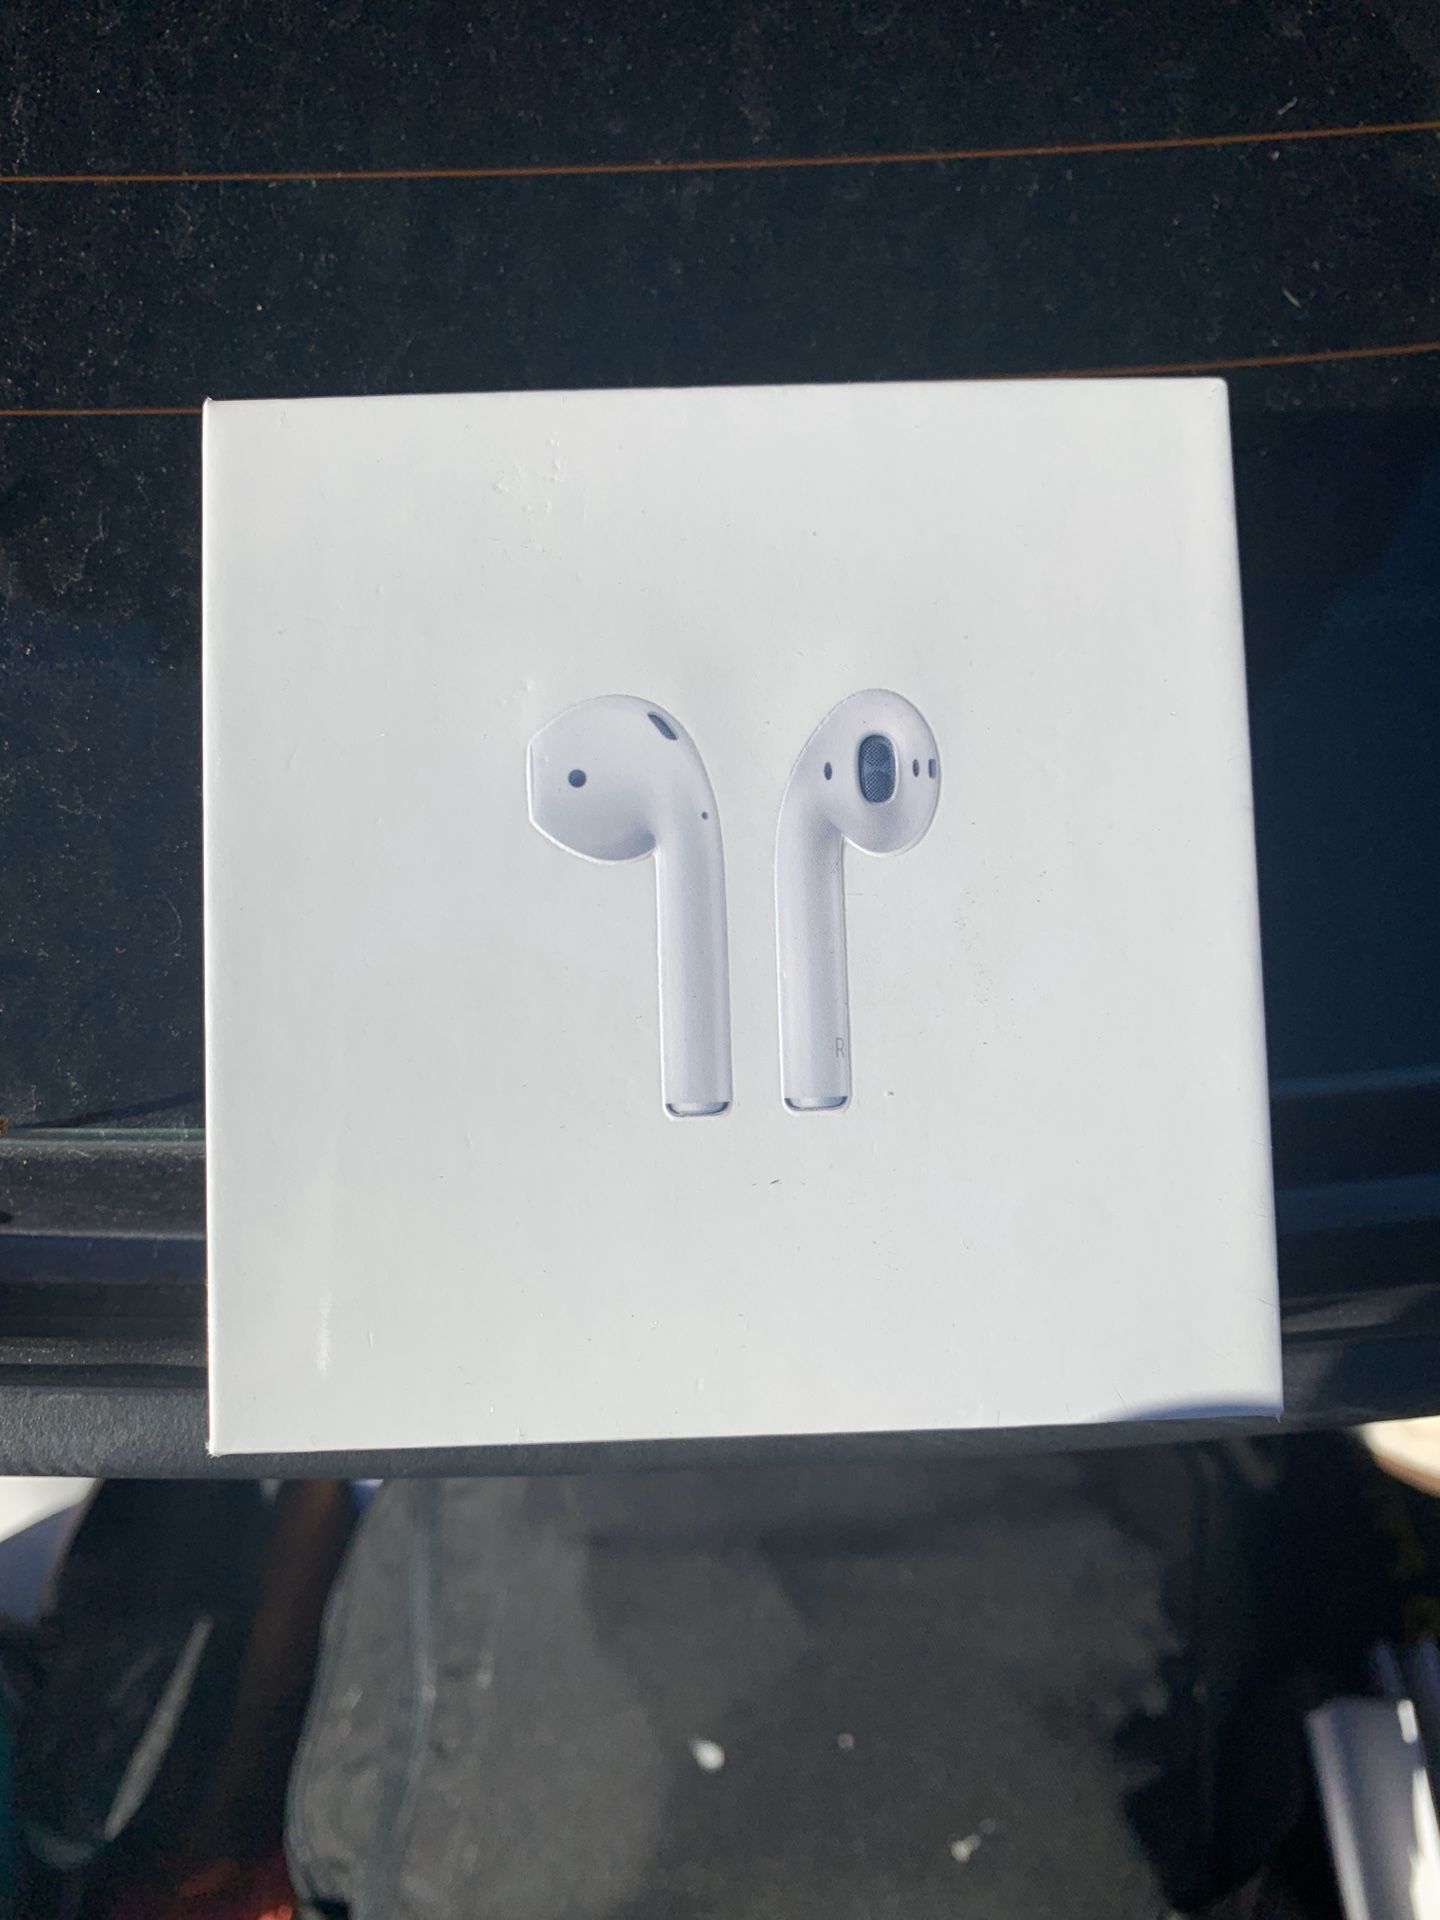 Apple Airpods second generation